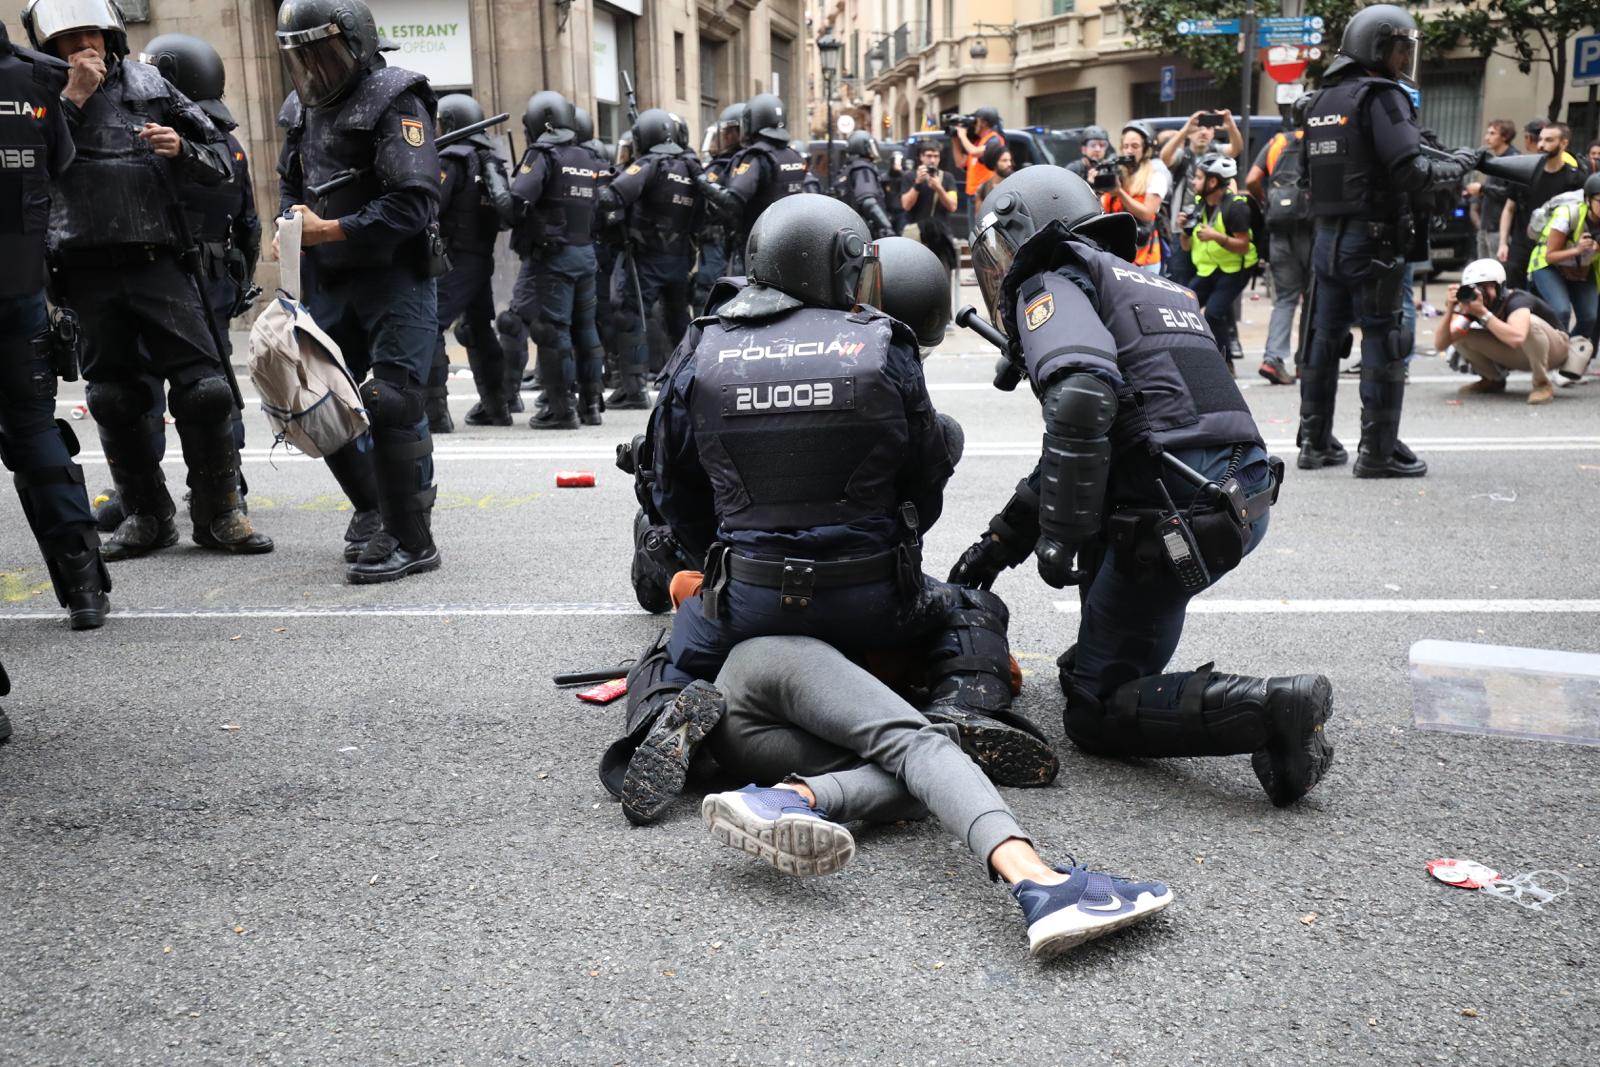 Catalonia protest arrests: violence, intimidation with a knife and a suicide attempt